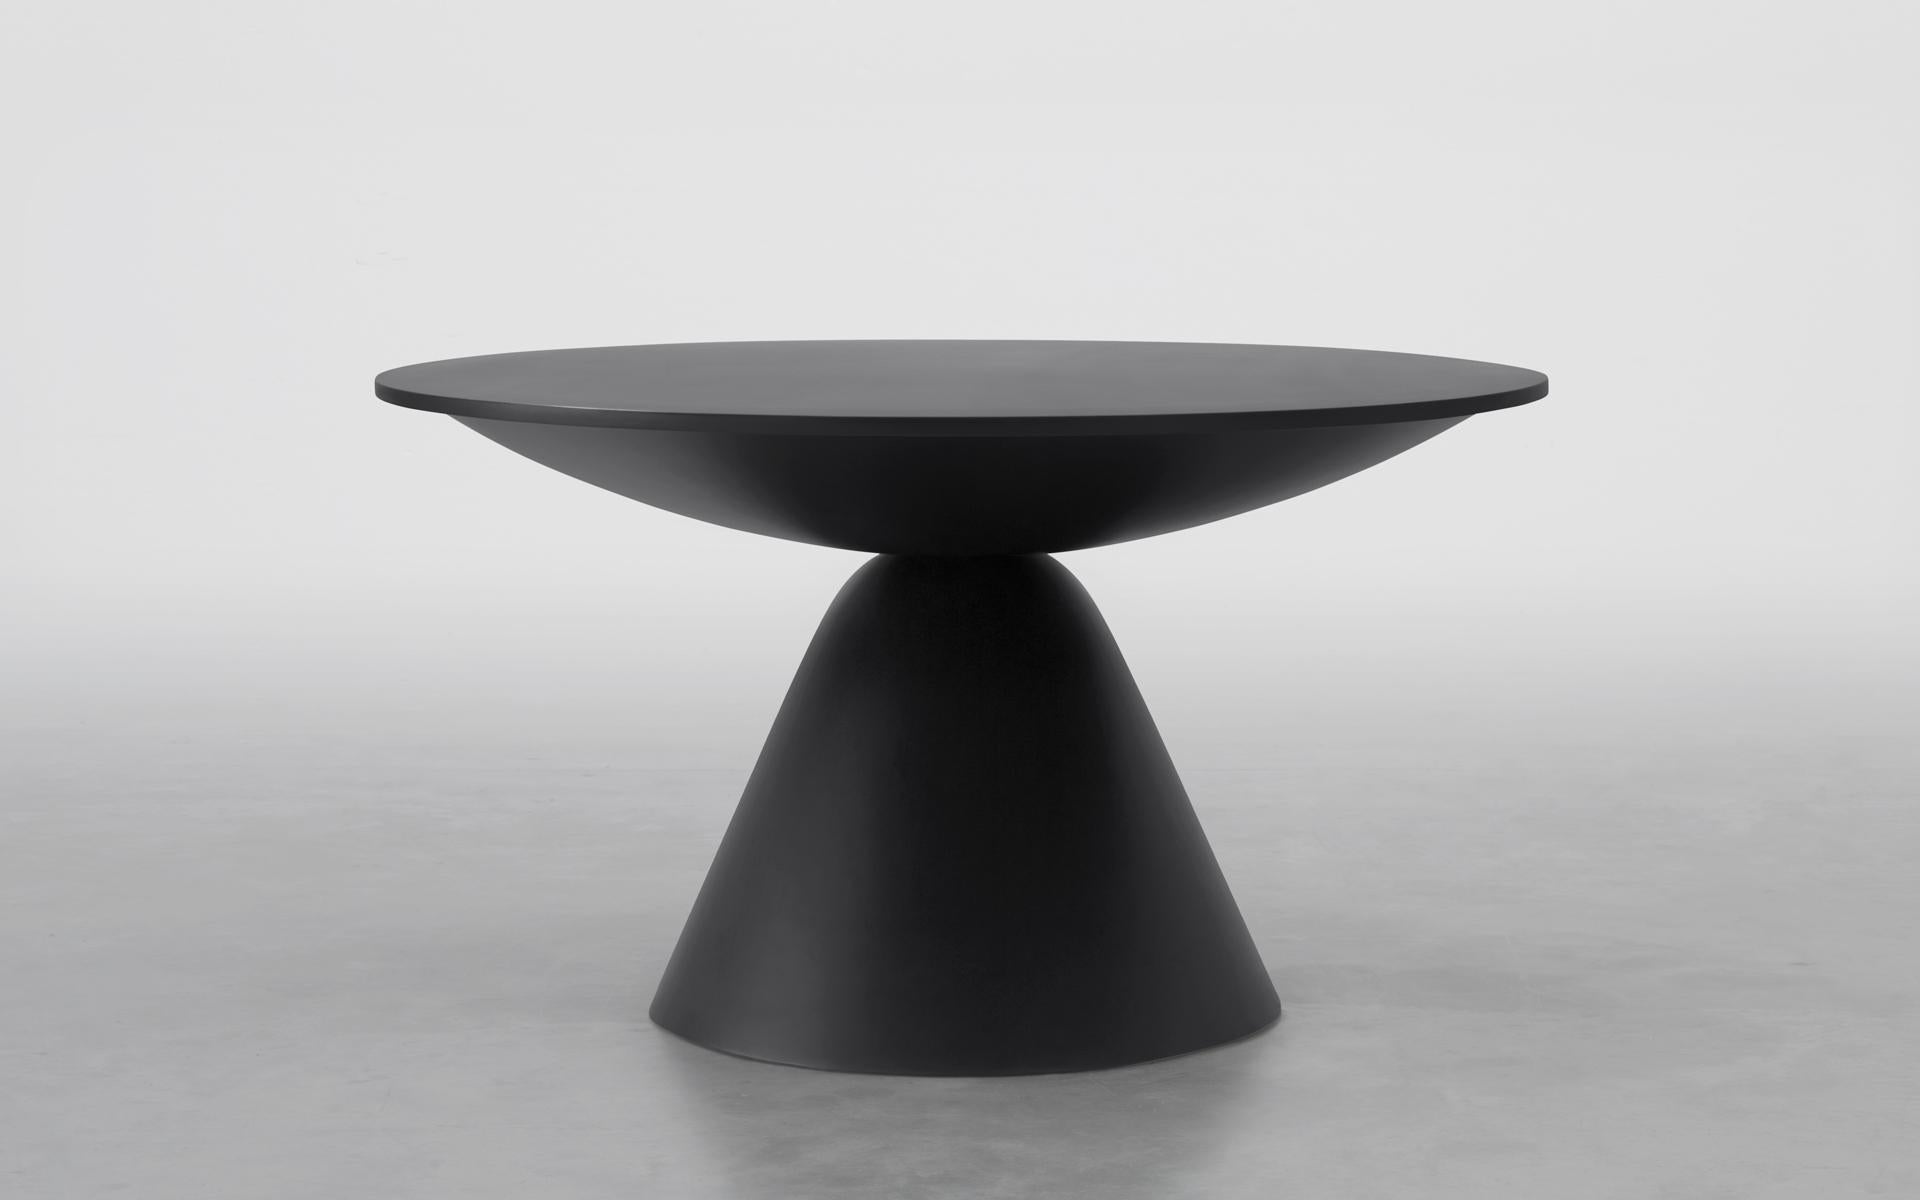 Plateau table 127 by Imperfettolab
Dimensions: Ø 127 x H 74 cm
Materials: fiberglass

Imperfetto Lab
Who we are? We are a family.
Verter Turroni, Emanuela Ravelli and our children Elia, Margherita and Eusebio.
All together, we are separate